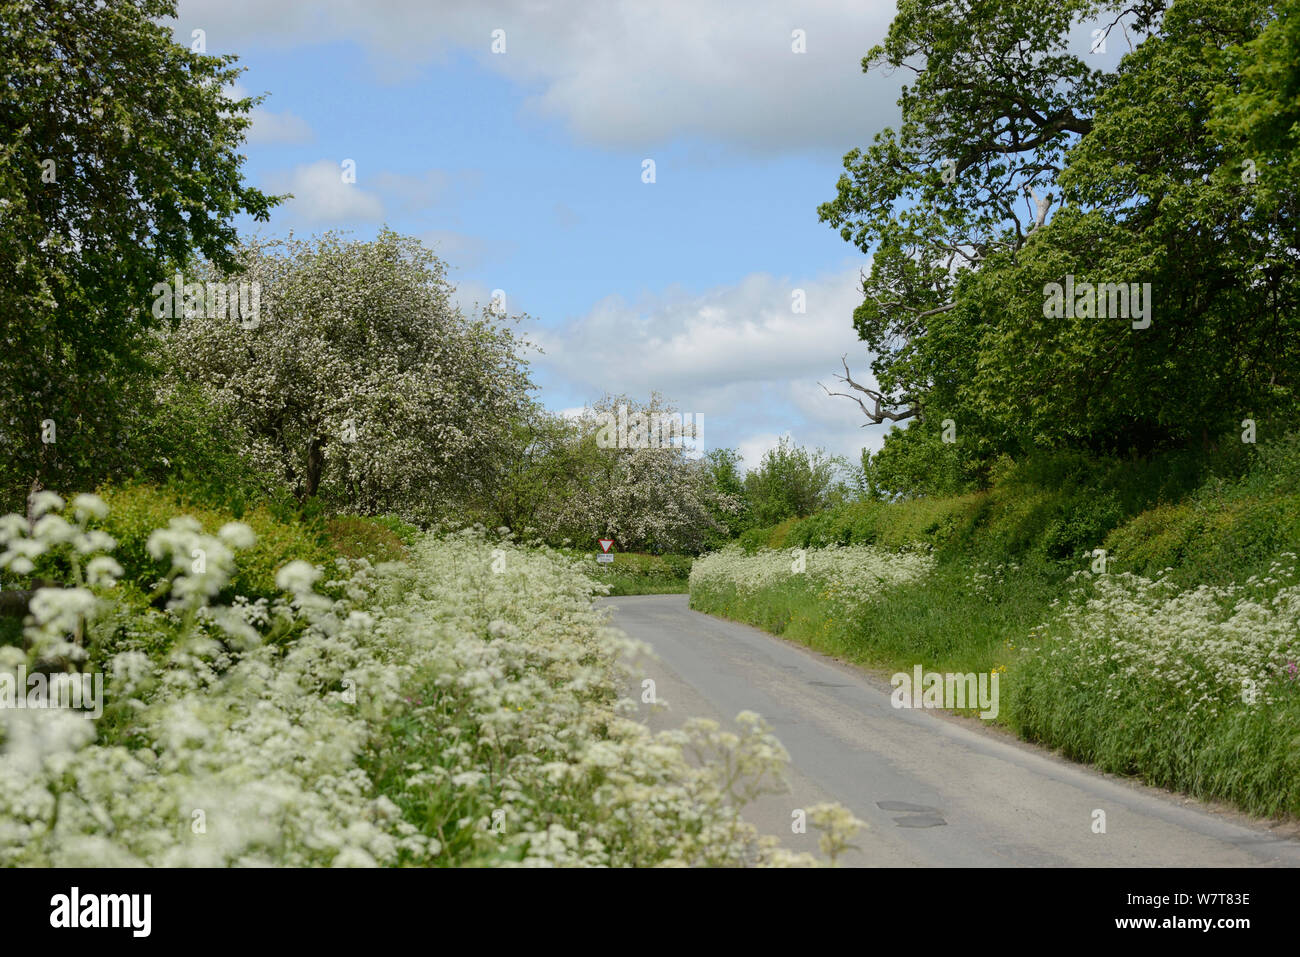 Flower-rich road verge with Cow Parsley (Anthriscus sylvestris) and flowering cider apple trees in background, Herefordshire, UK, June. Stock Photo